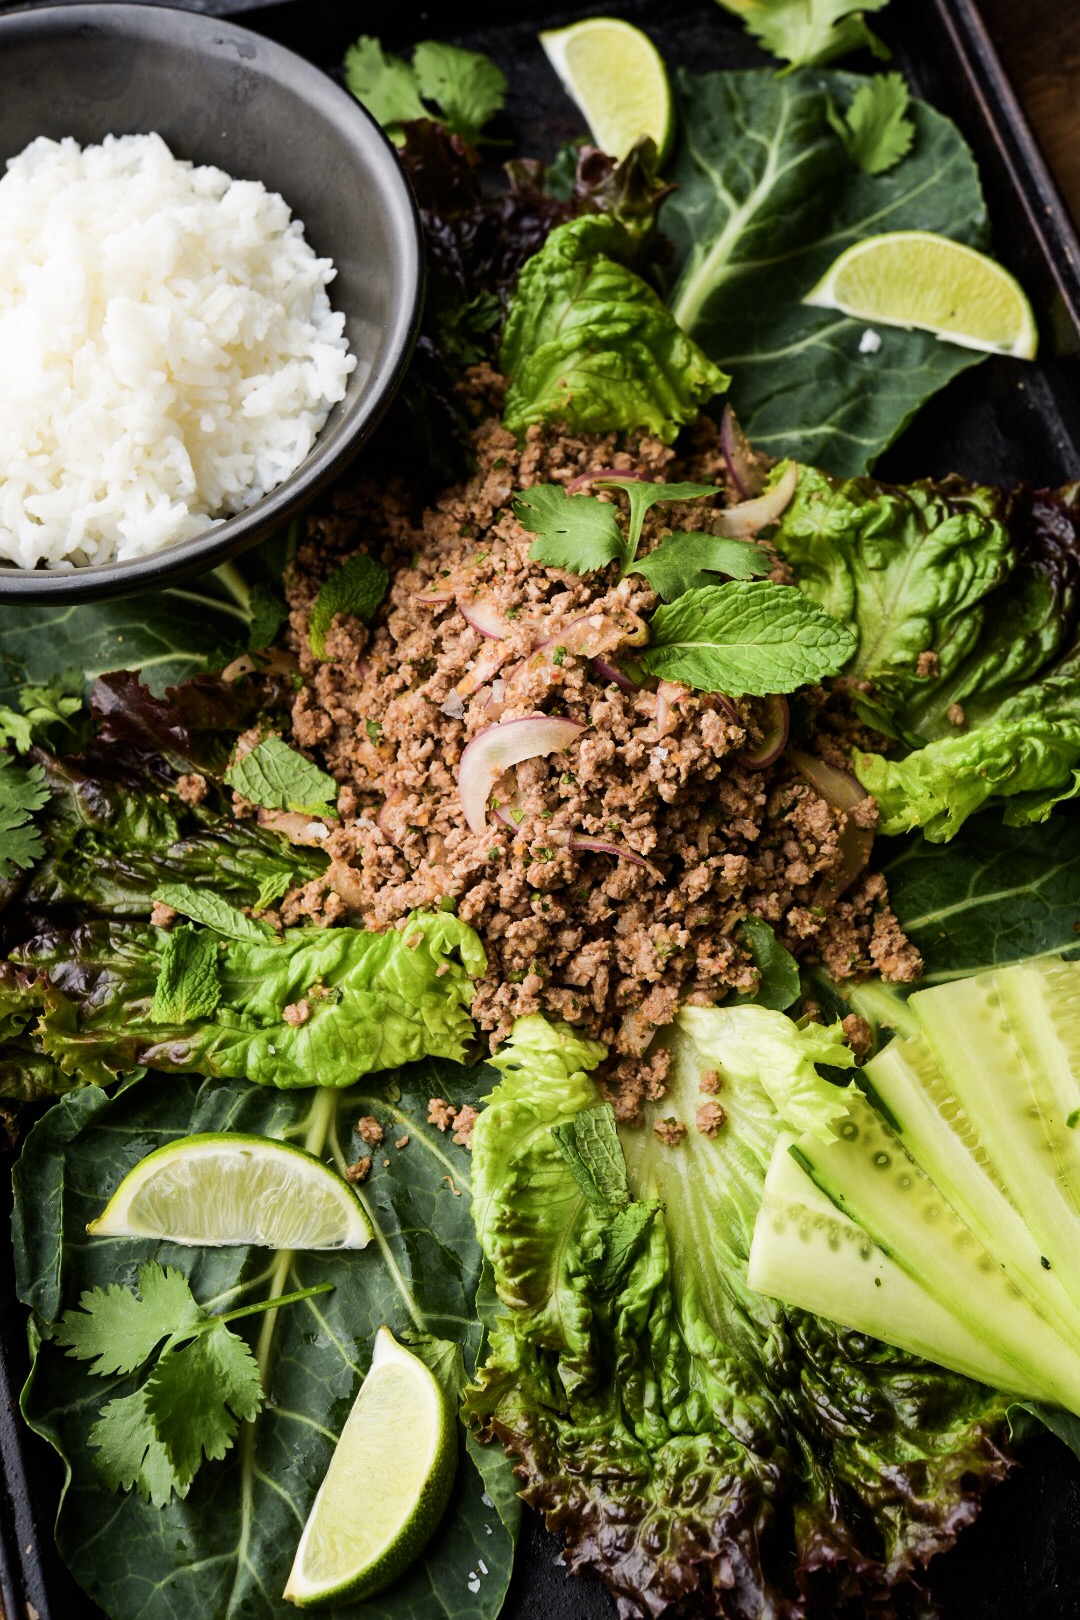 Thai-style laap with ground venison and collard leaves